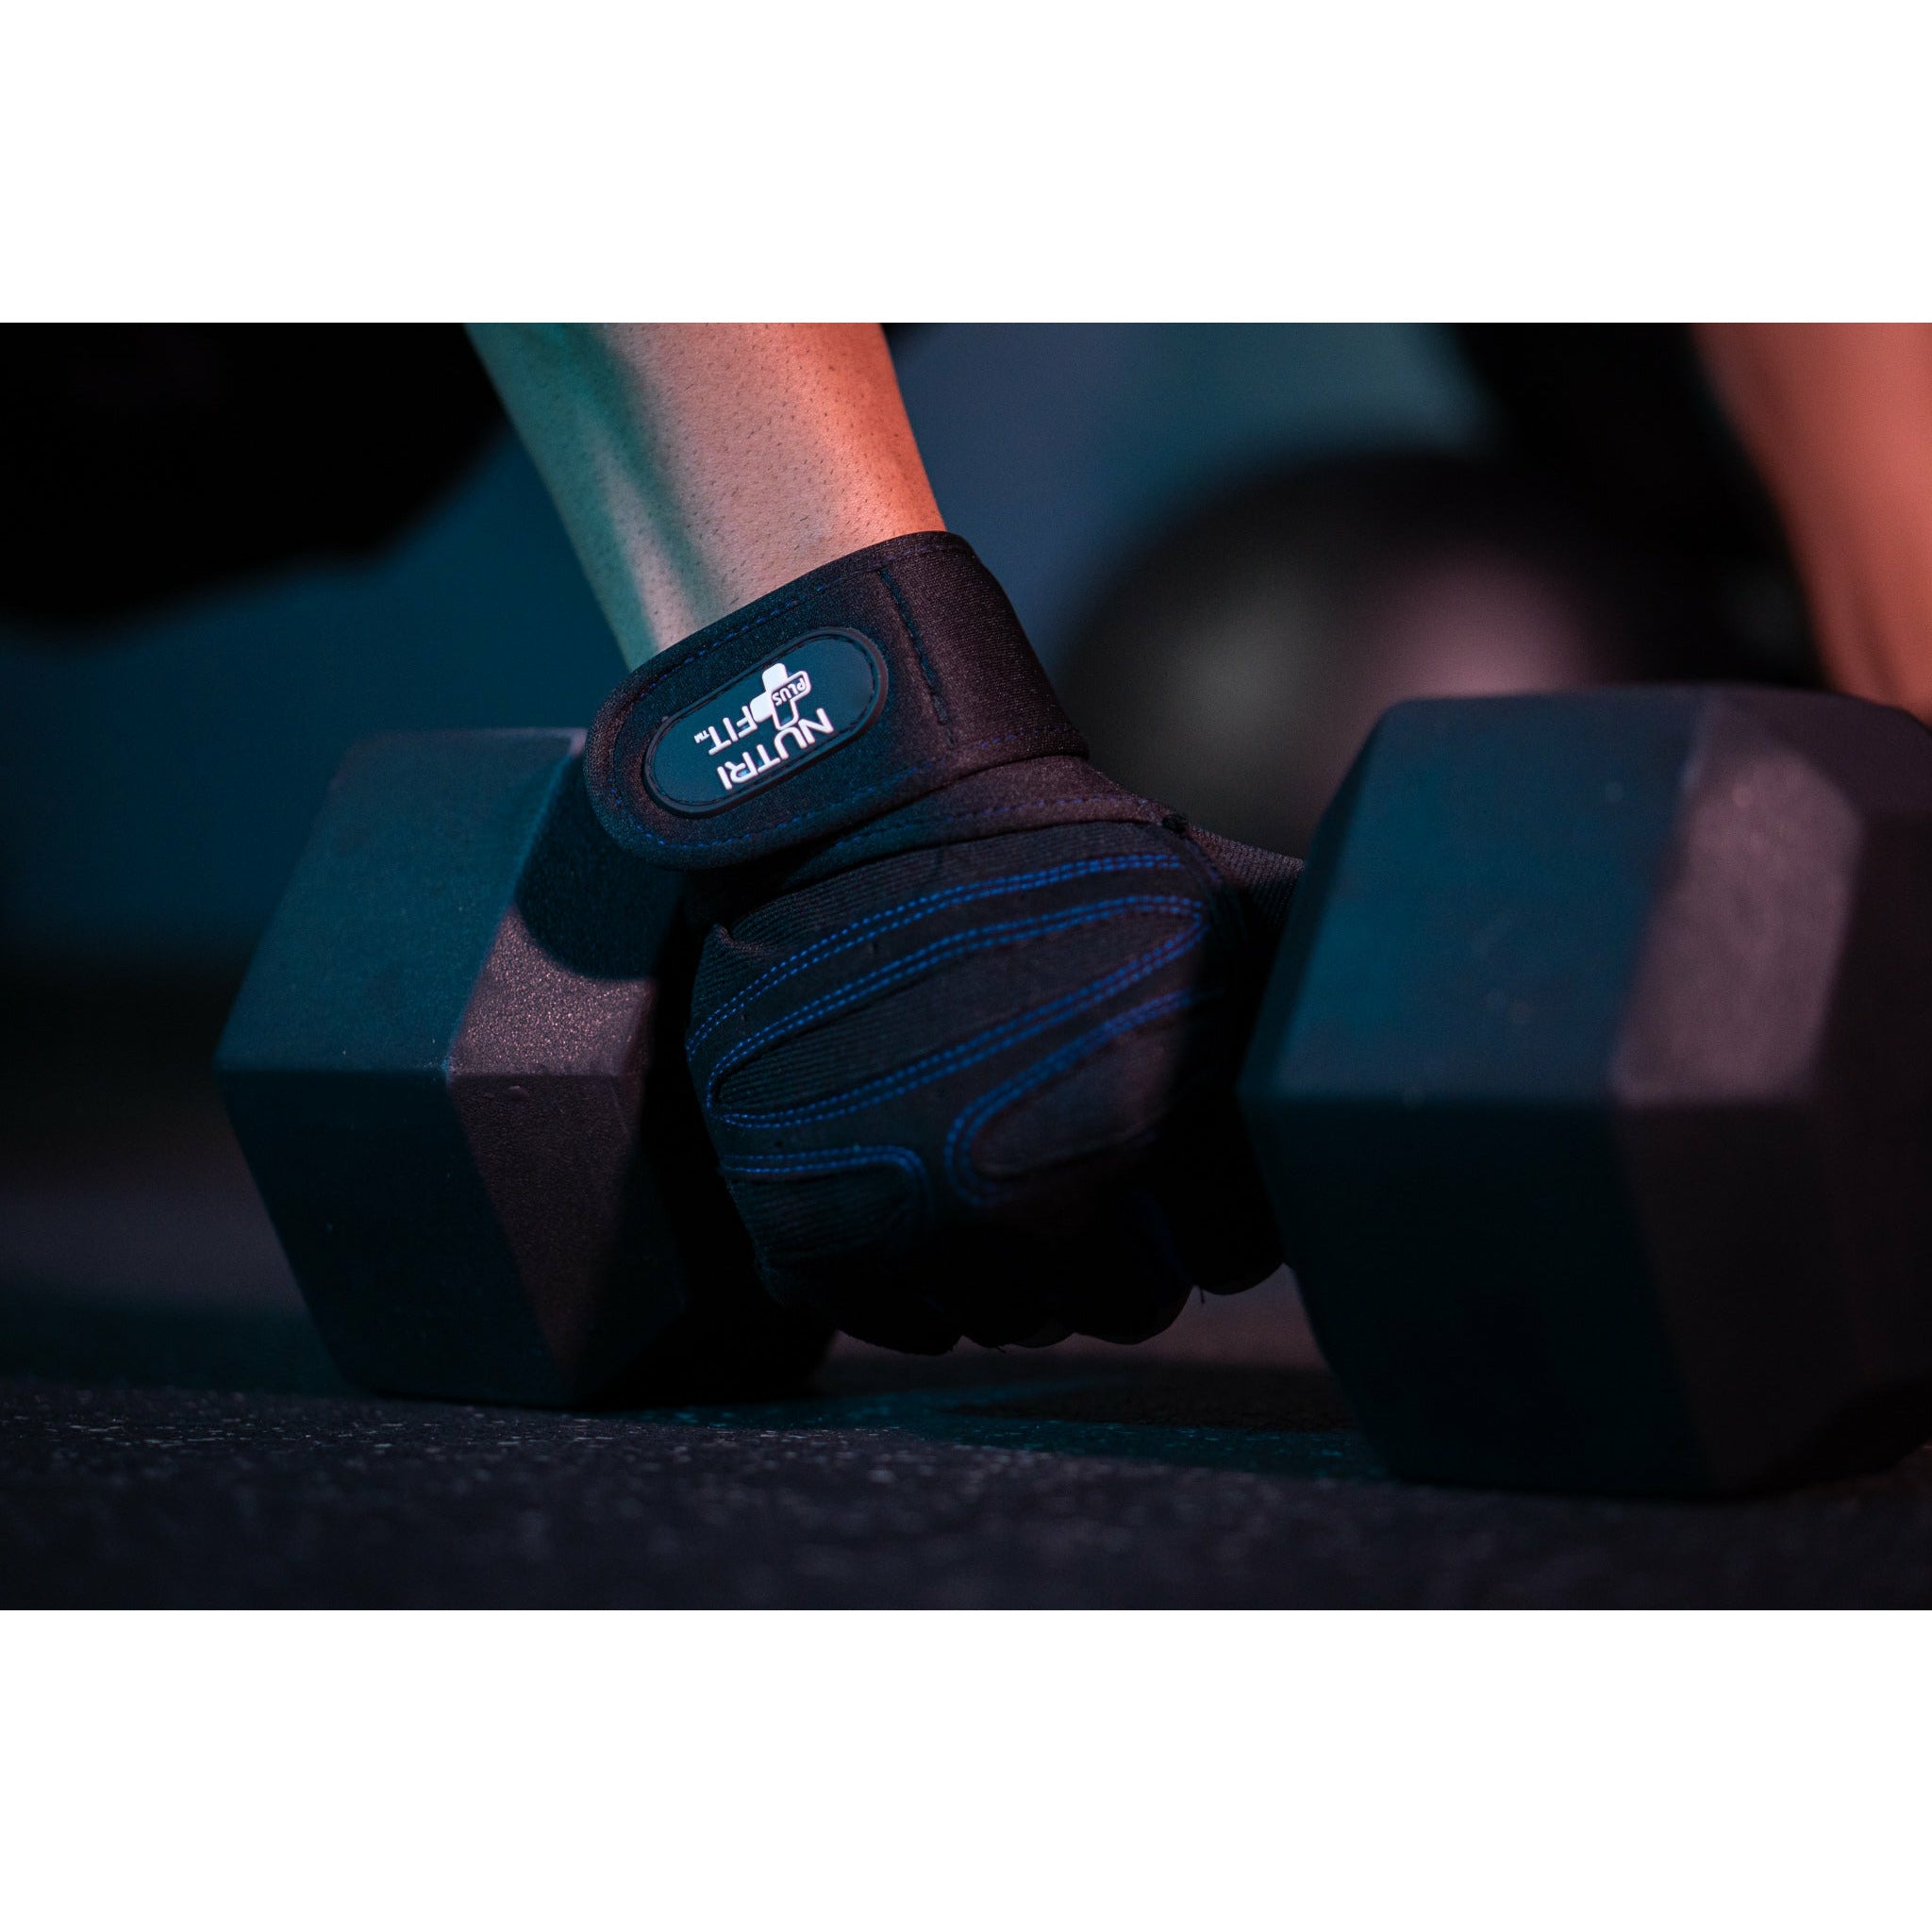 Nutrifit Plus High Performance Intenses Training Gloves with Wristswrap for Support in Multicolors